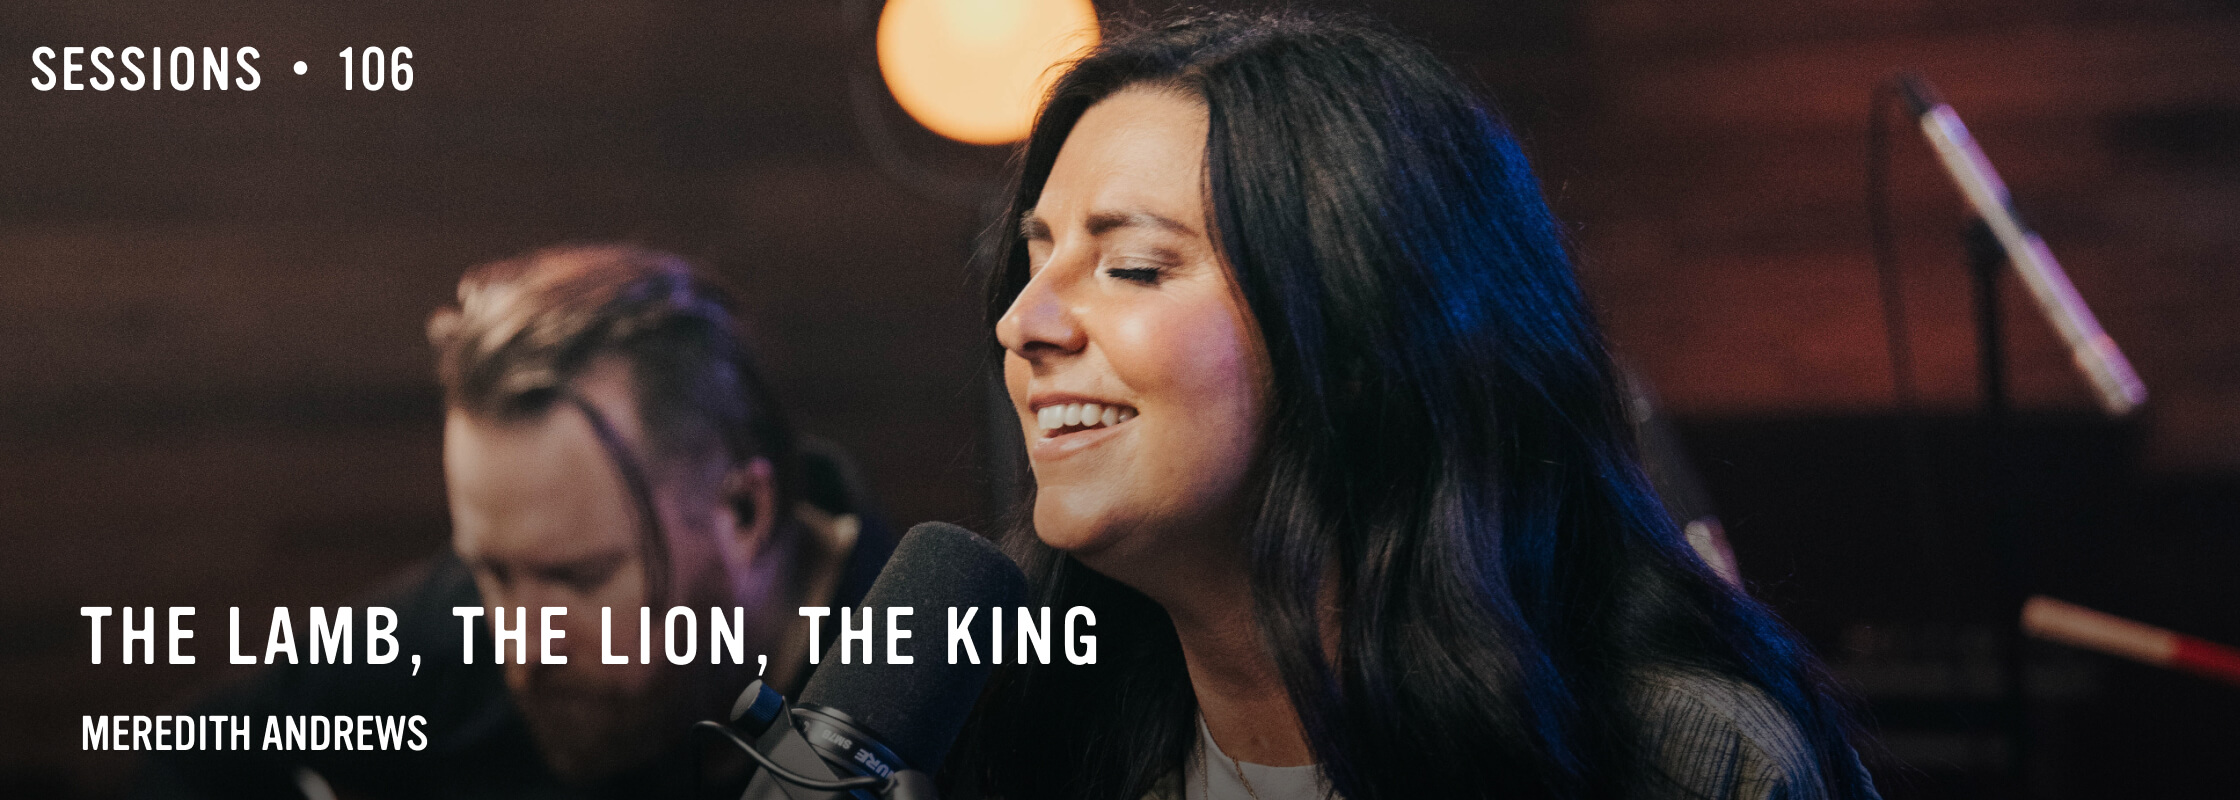 Meredith Andrews | The Lamb, The Lion, The King (MultiTracks Session)